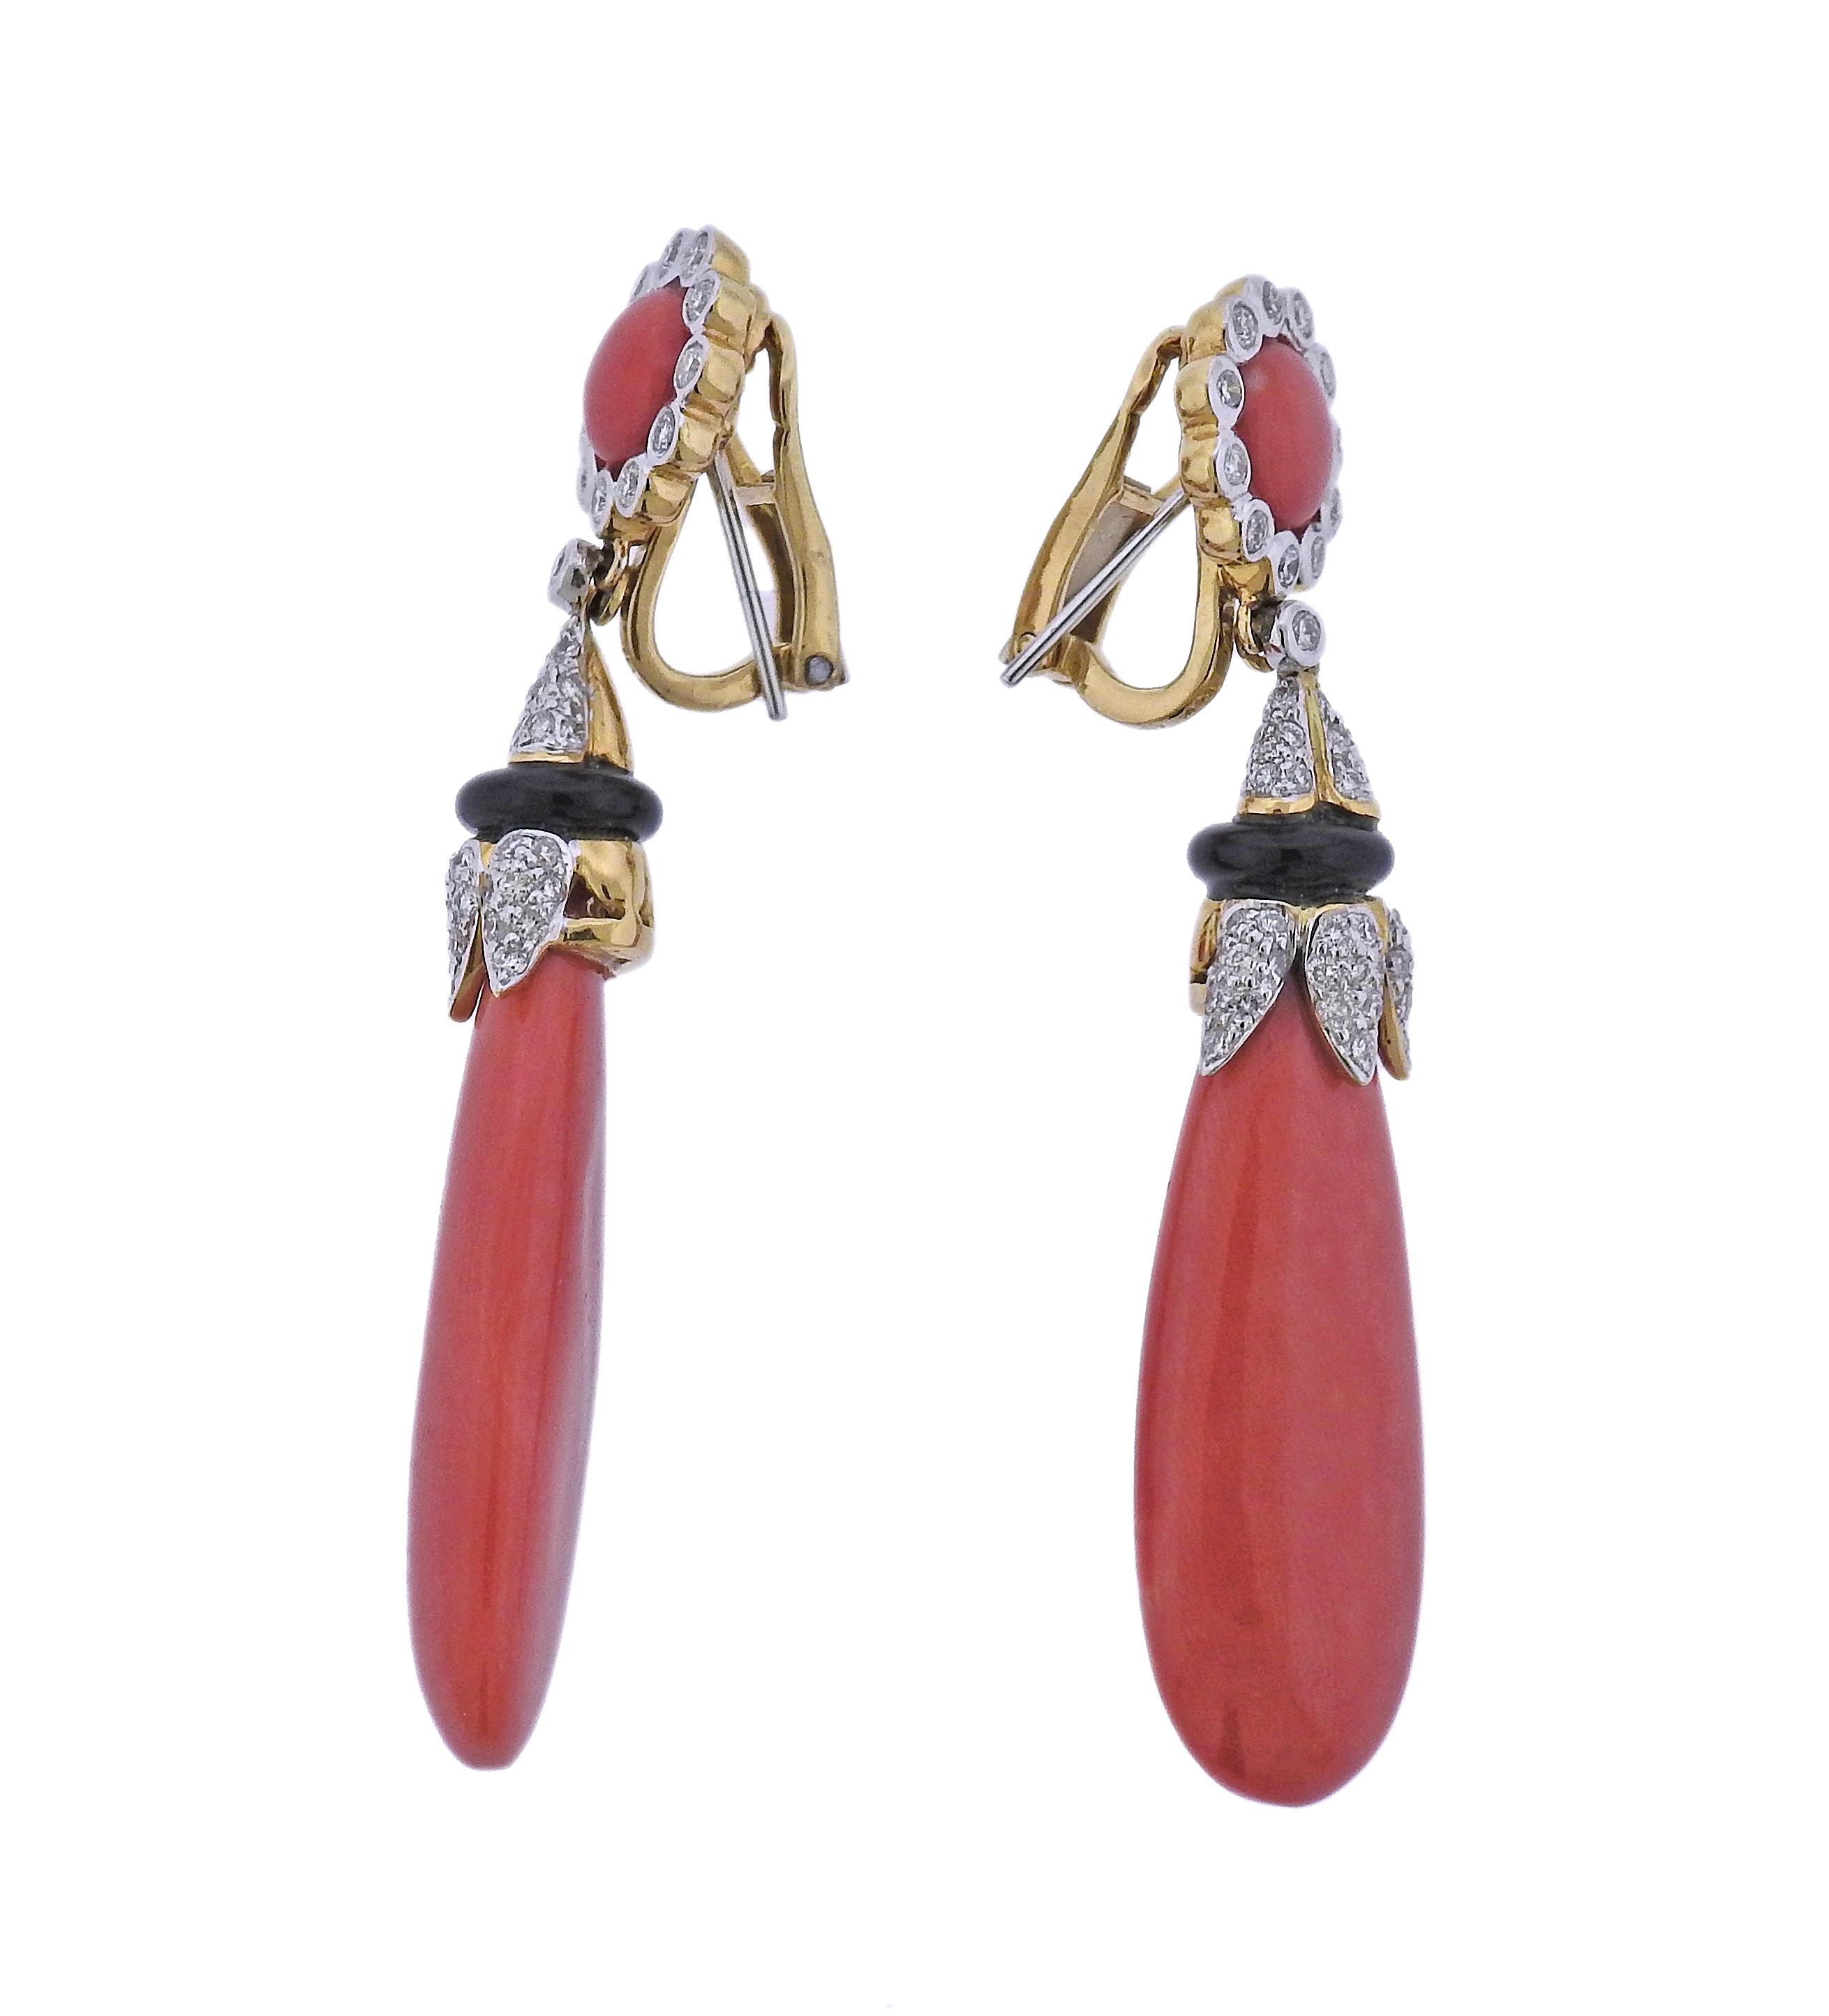 Pair of 18k yellow gold earrings featuring coral drops, onyx and approximately 0.70ctw of H/SI1 diamonds. Earrings are 61mm long. Marked 750 18k. Weight is 20.7 grams. 